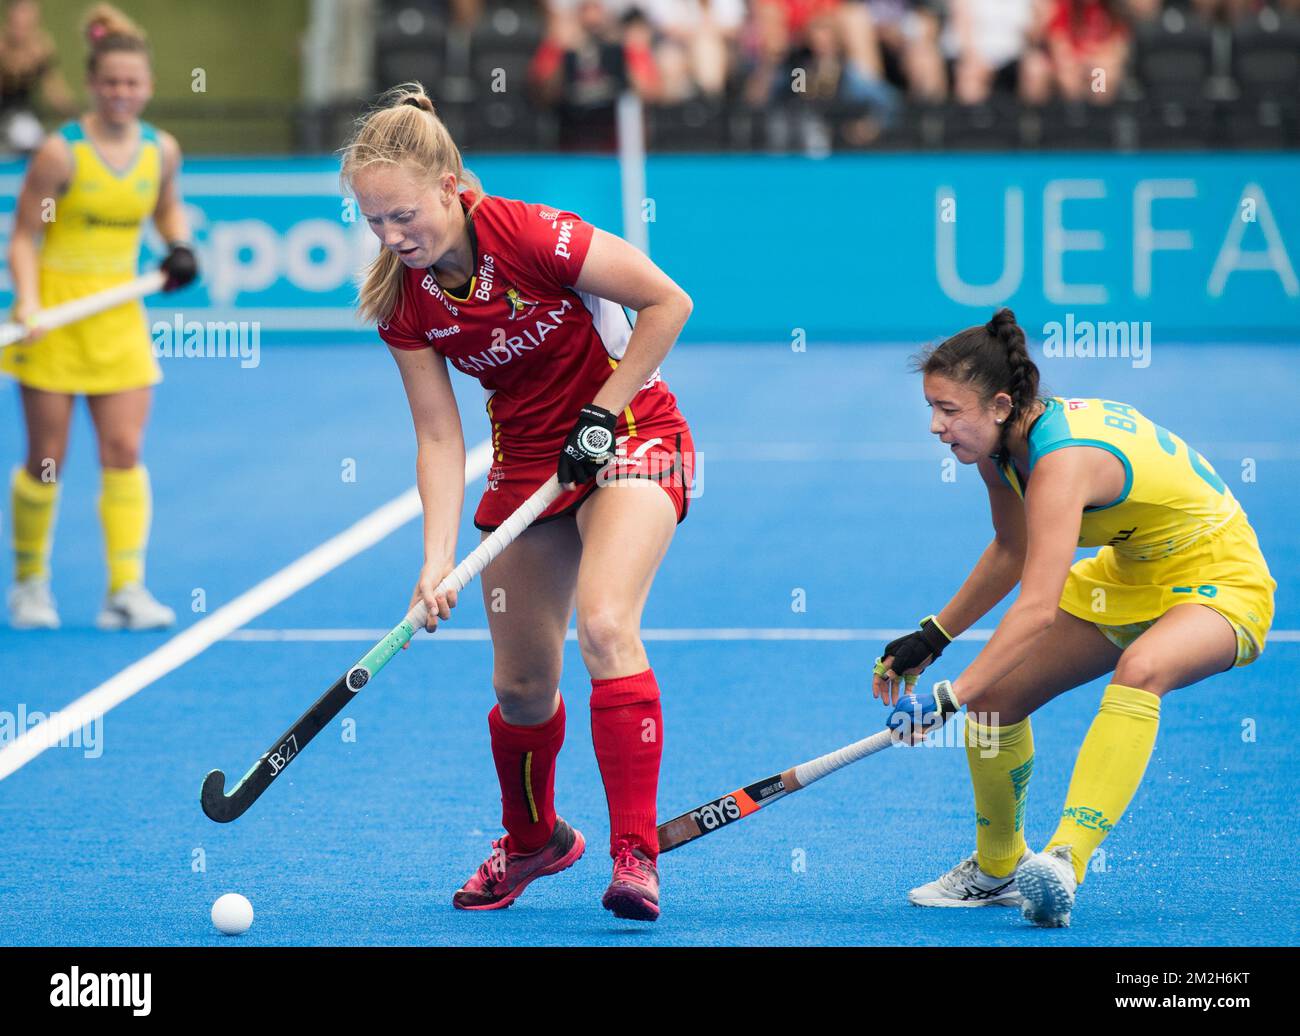 Belgium's Jill Boon and Australia's Kristina Bates pictured in action during the game between Australia and Belgium in group D at the Hockey Women's World Cup, in London, UK, Tuesday 24 July 2018. The Hockey Women's World Cup takes place from 21 July to 05 August at the Lee Valley Hockey Centre in London. BELGA PHOTO BENOIT DOPPAGNE  Stock Photo